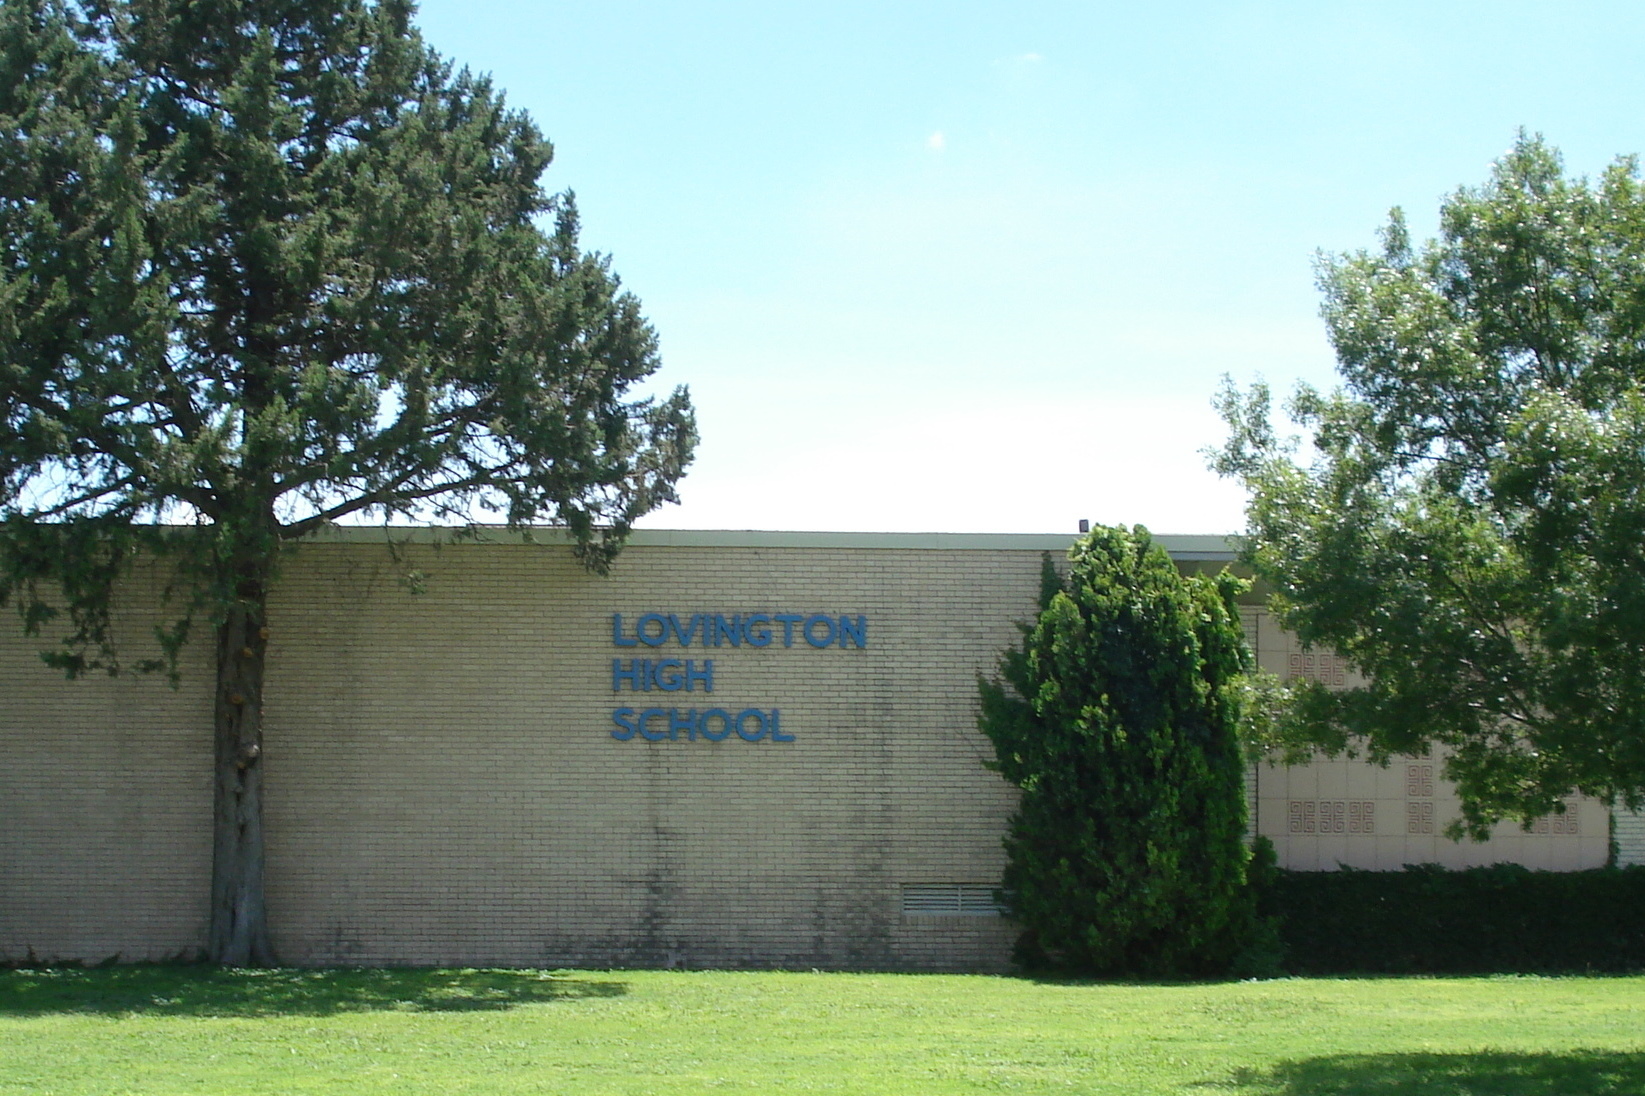 high school front view